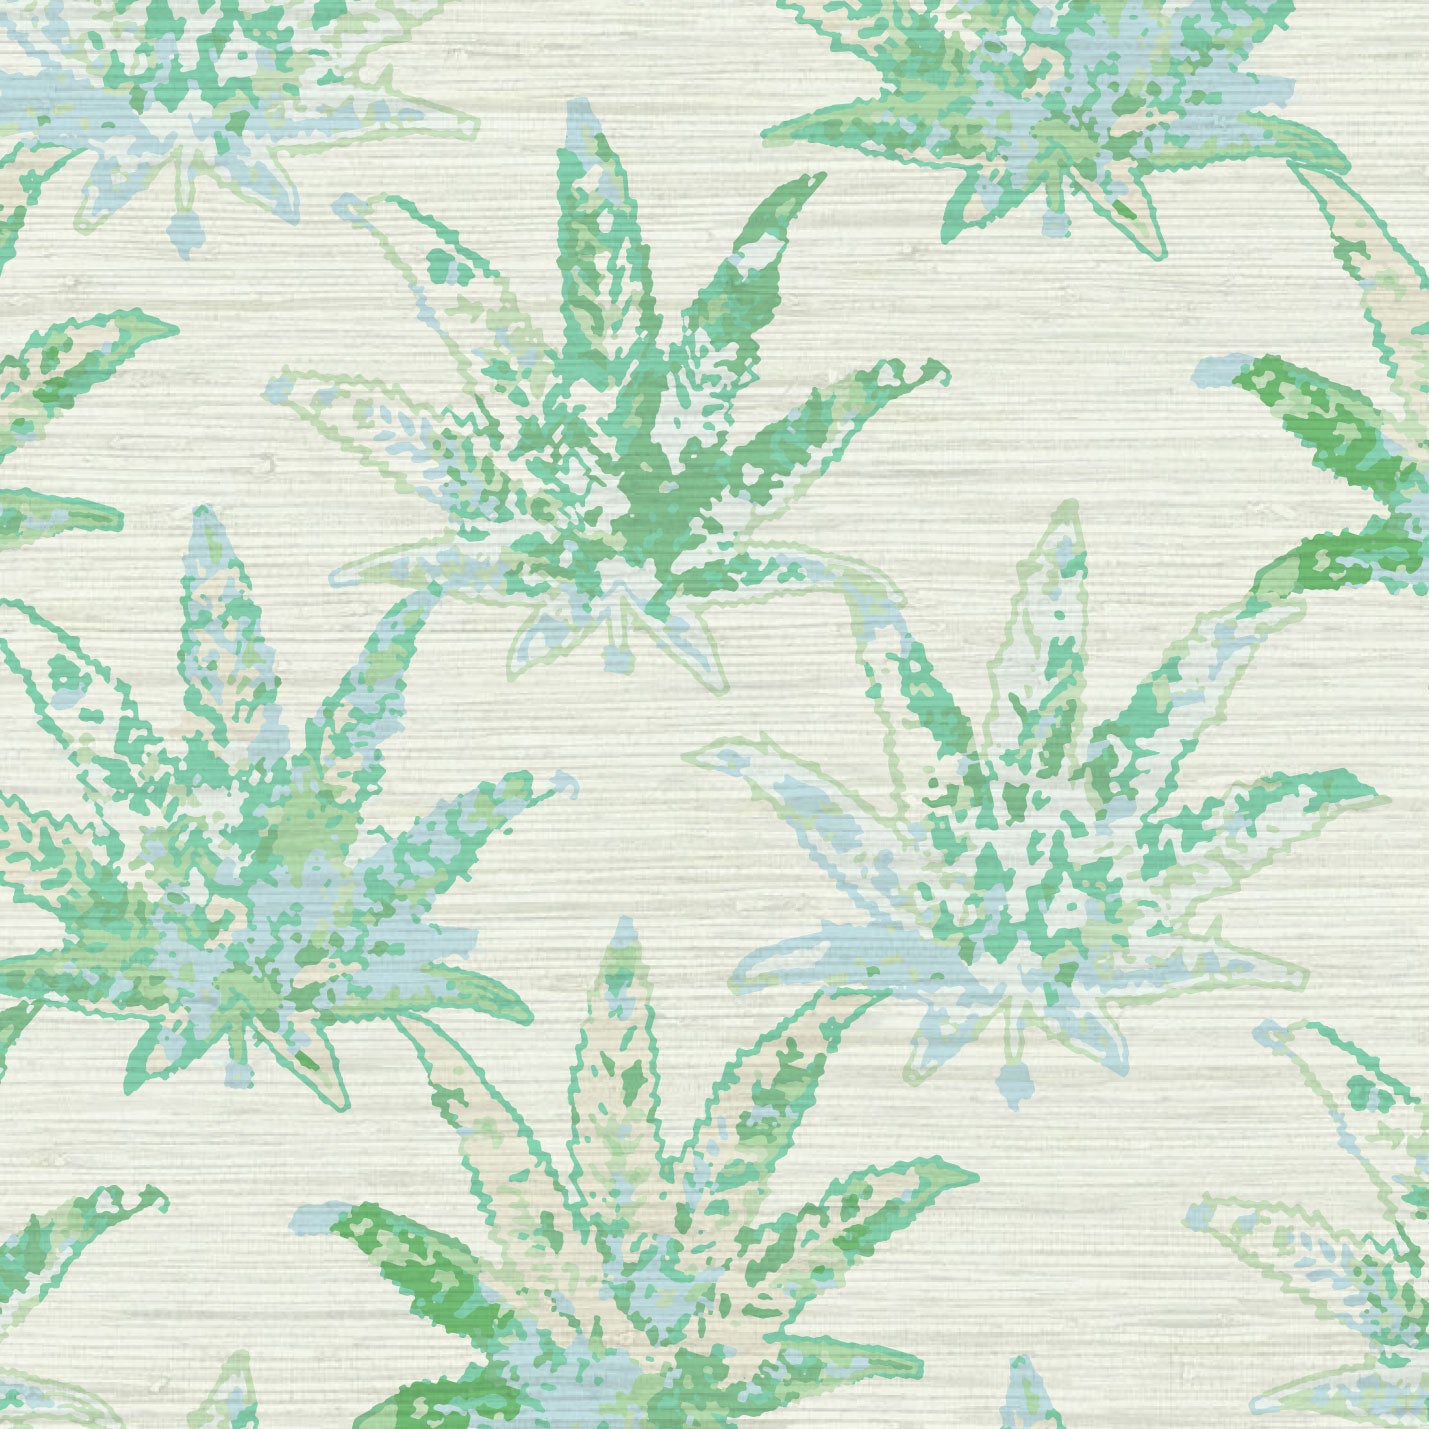 cream based printed grasscloth texture natural nature eco-friendly wallpaper wall-covering oversize marijuana weed mary jane leaf leaves arranged in a grid-like pattern tonal green watercolor leafs custom design interior design botanical garden tropical cream green bold high quality unique retro chic tropical jungle vacation retreat beach surf coastal